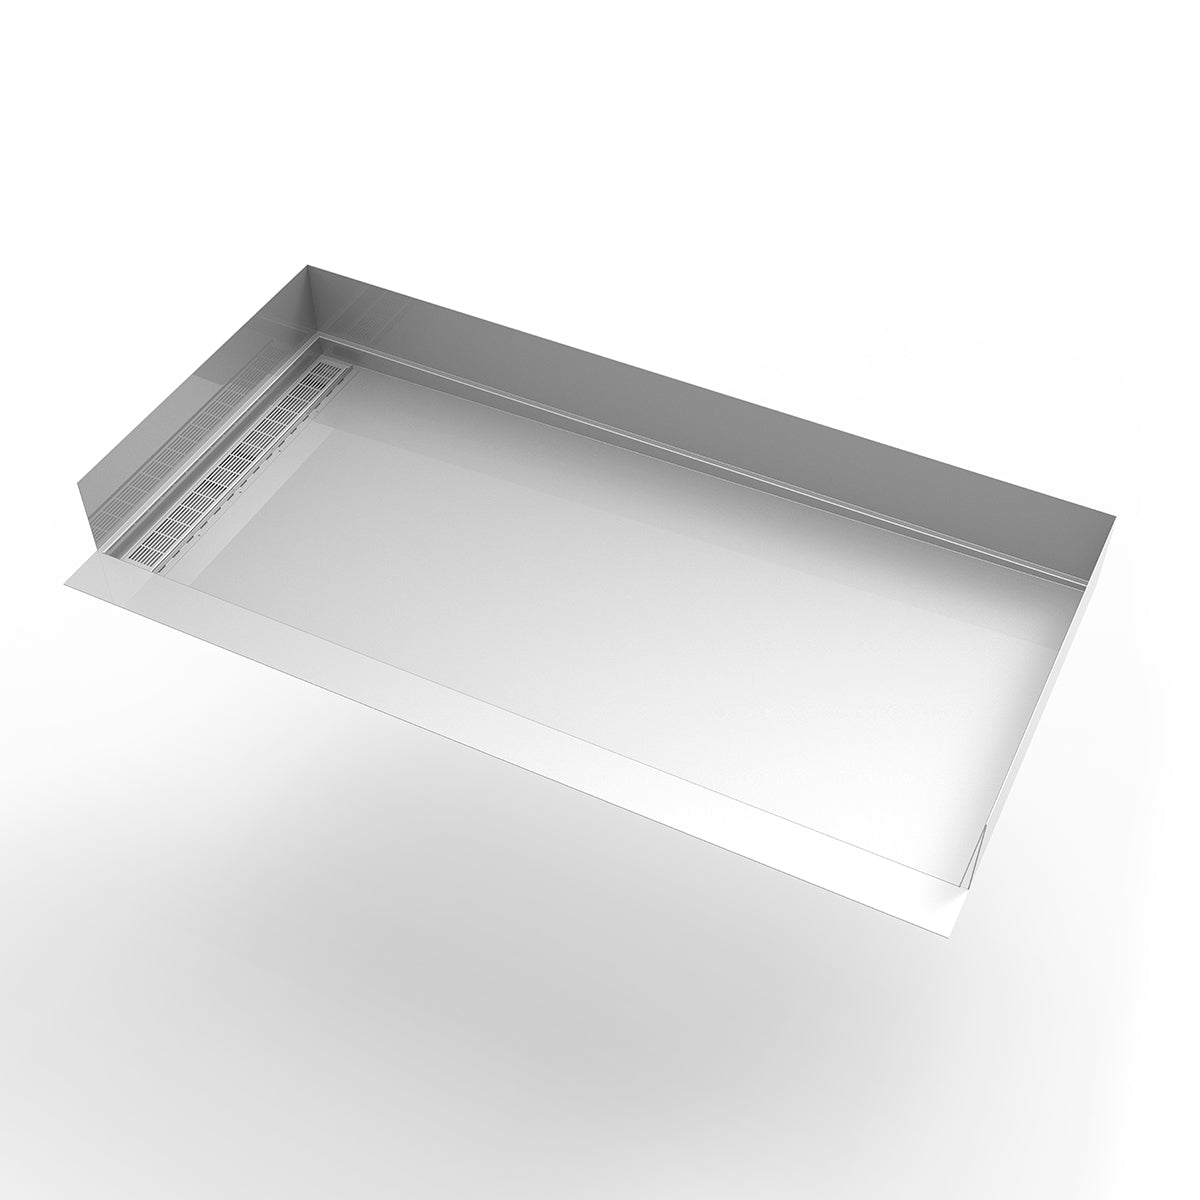 Infinity Drain 30"x 60" Curbless Stainless Steel Shower Base with Left Wall Slotted Pattern Linear Drain location